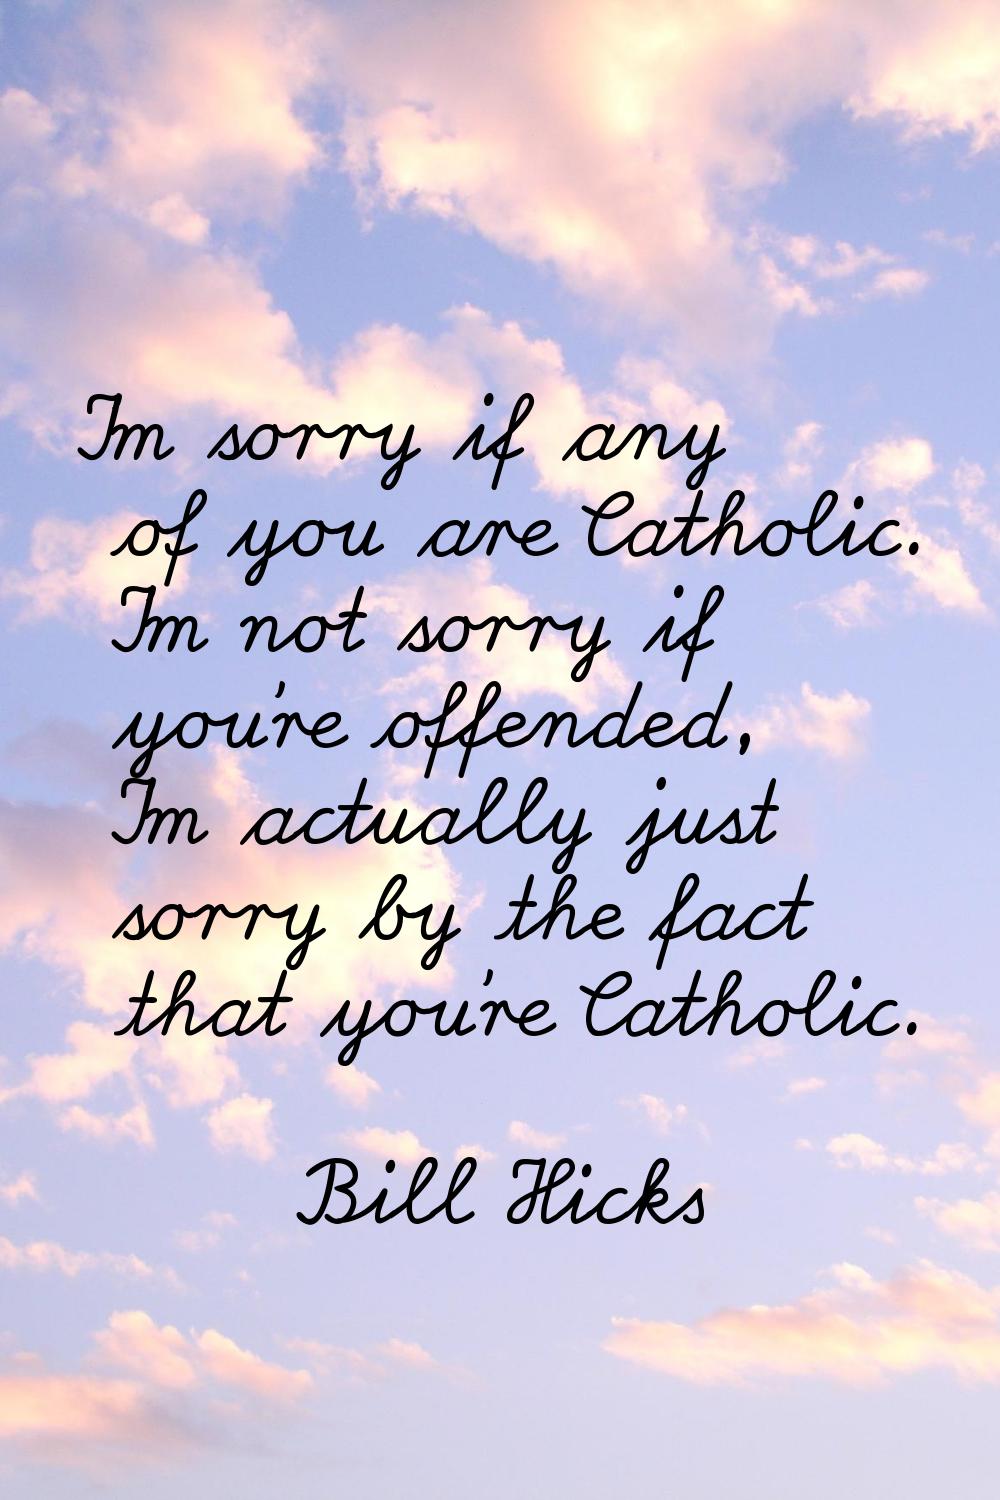 I'm sorry if any of you are Catholic. I'm not sorry if you're offended, I'm actually just sorry by 